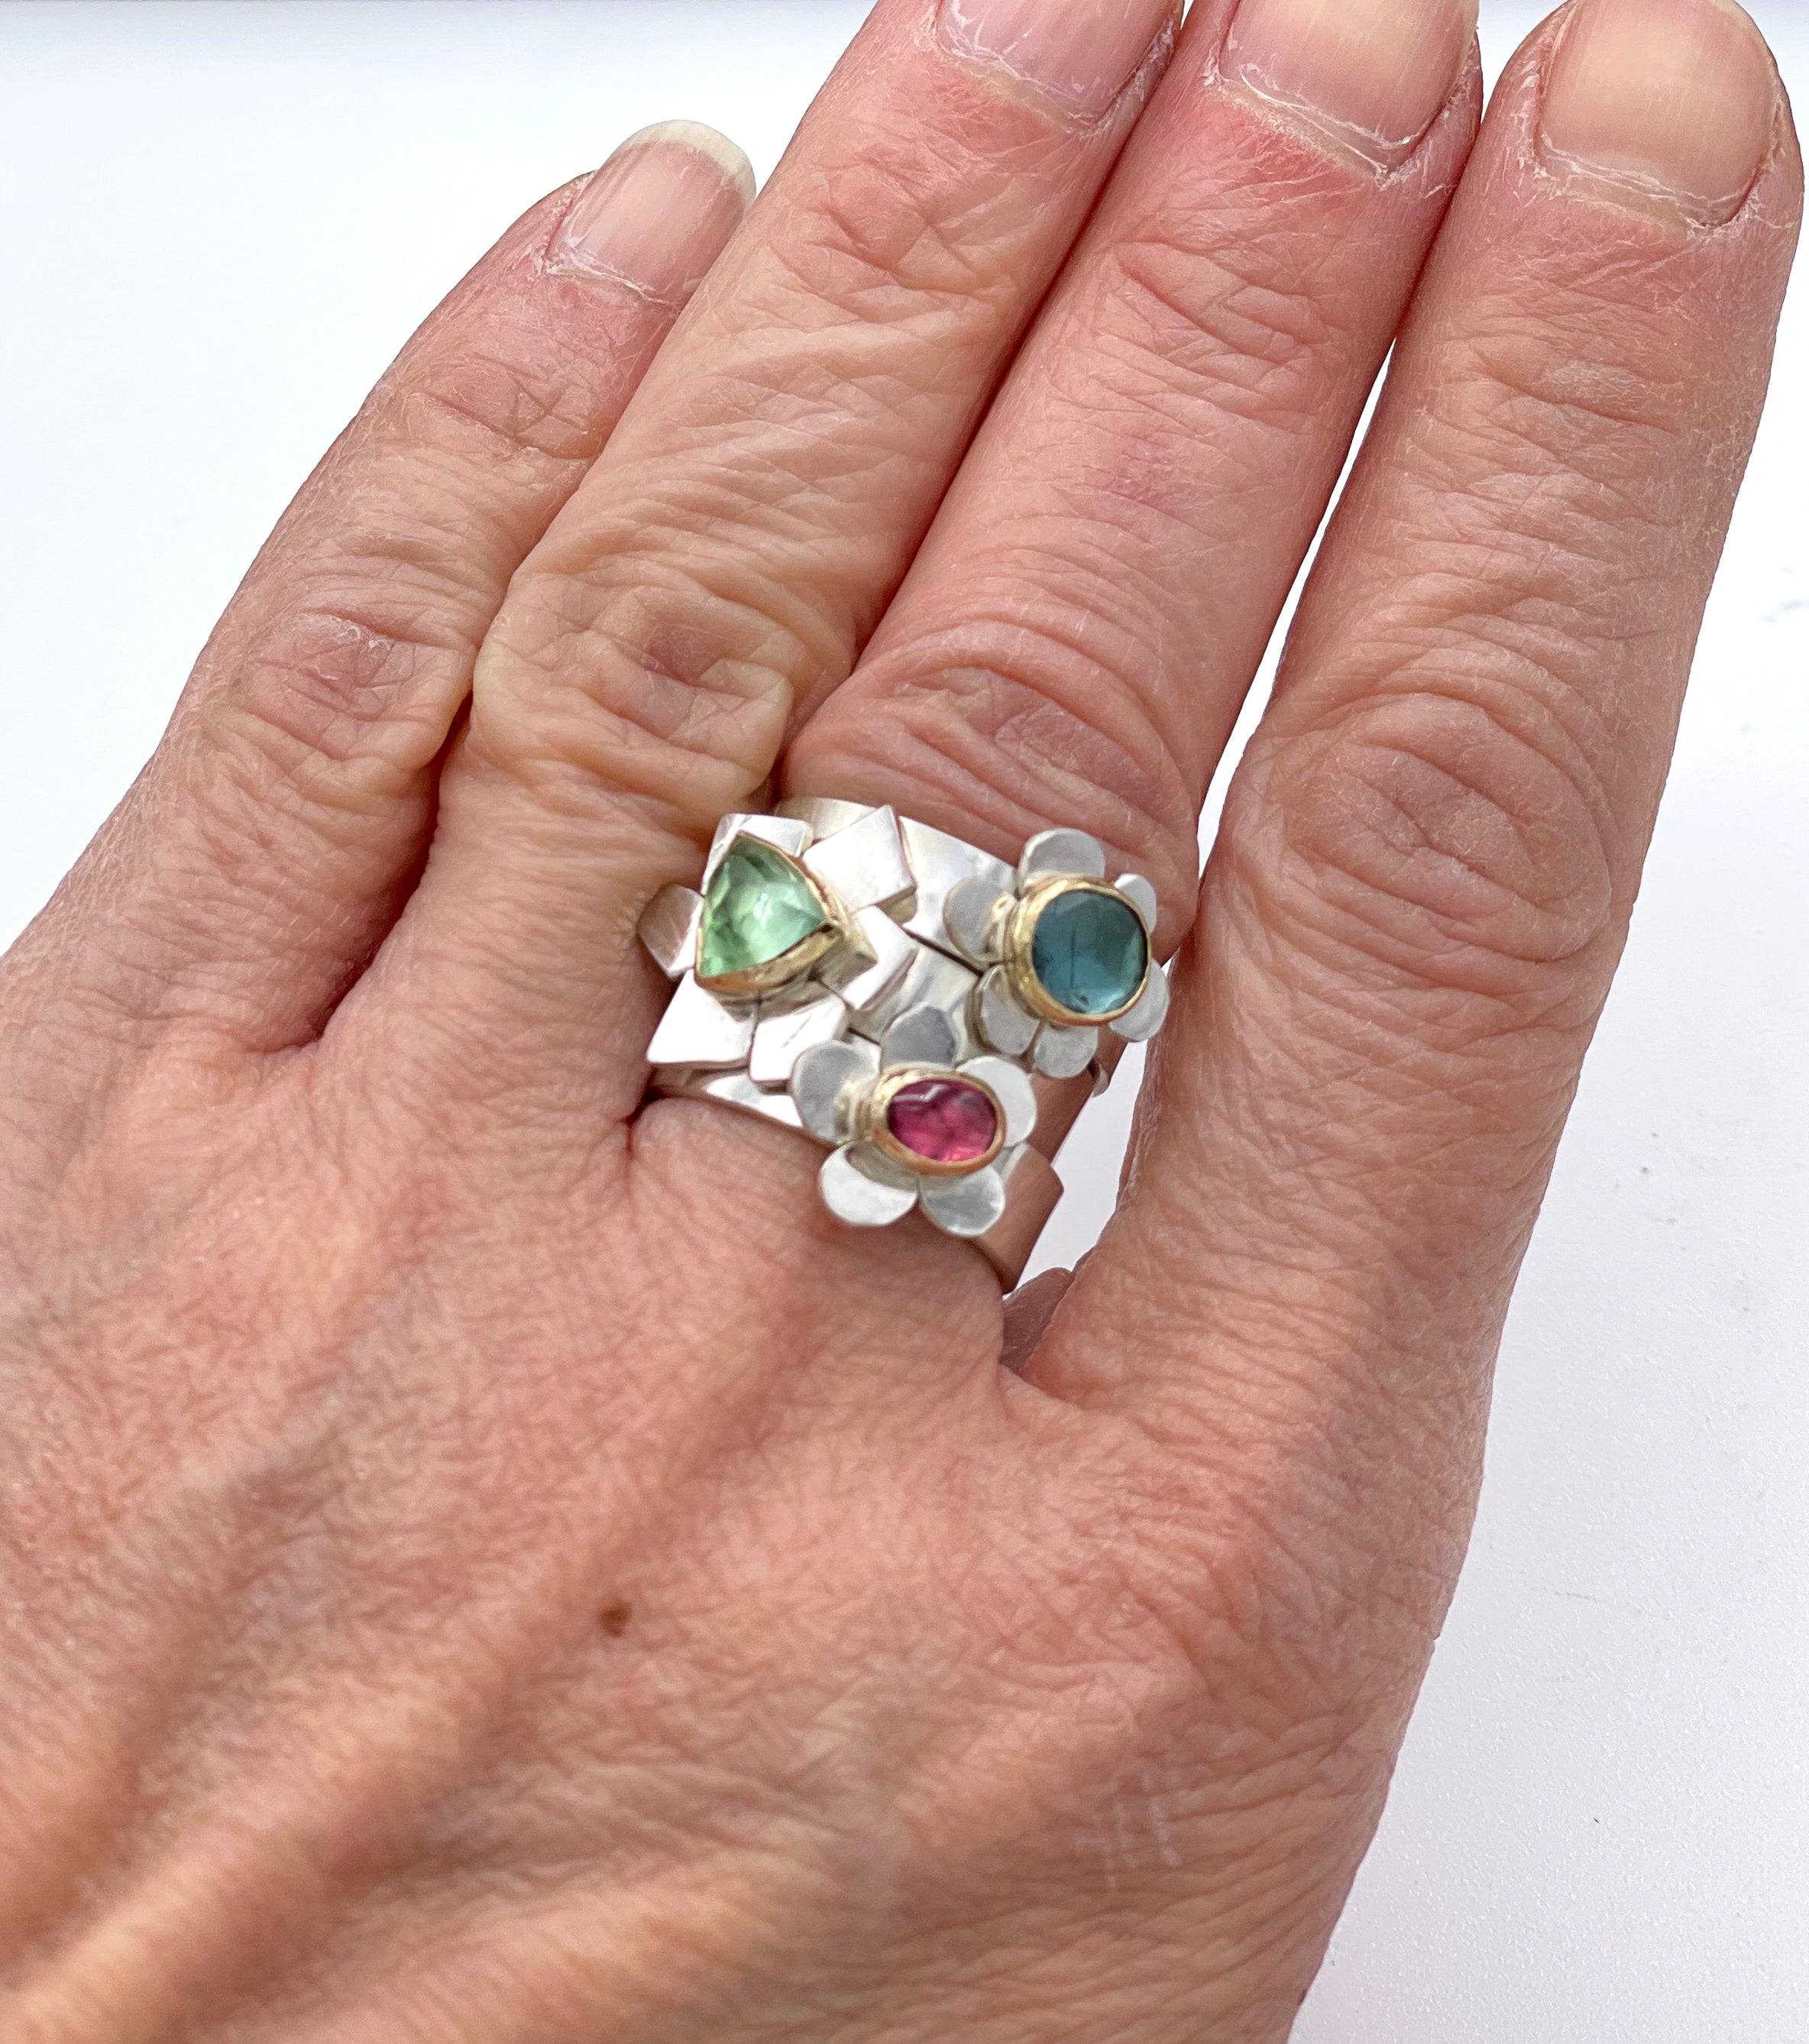 Tourmaline Flower Ring, Sterling and 14K Rubellite Tourmaline Flower Ring, One of a Kind